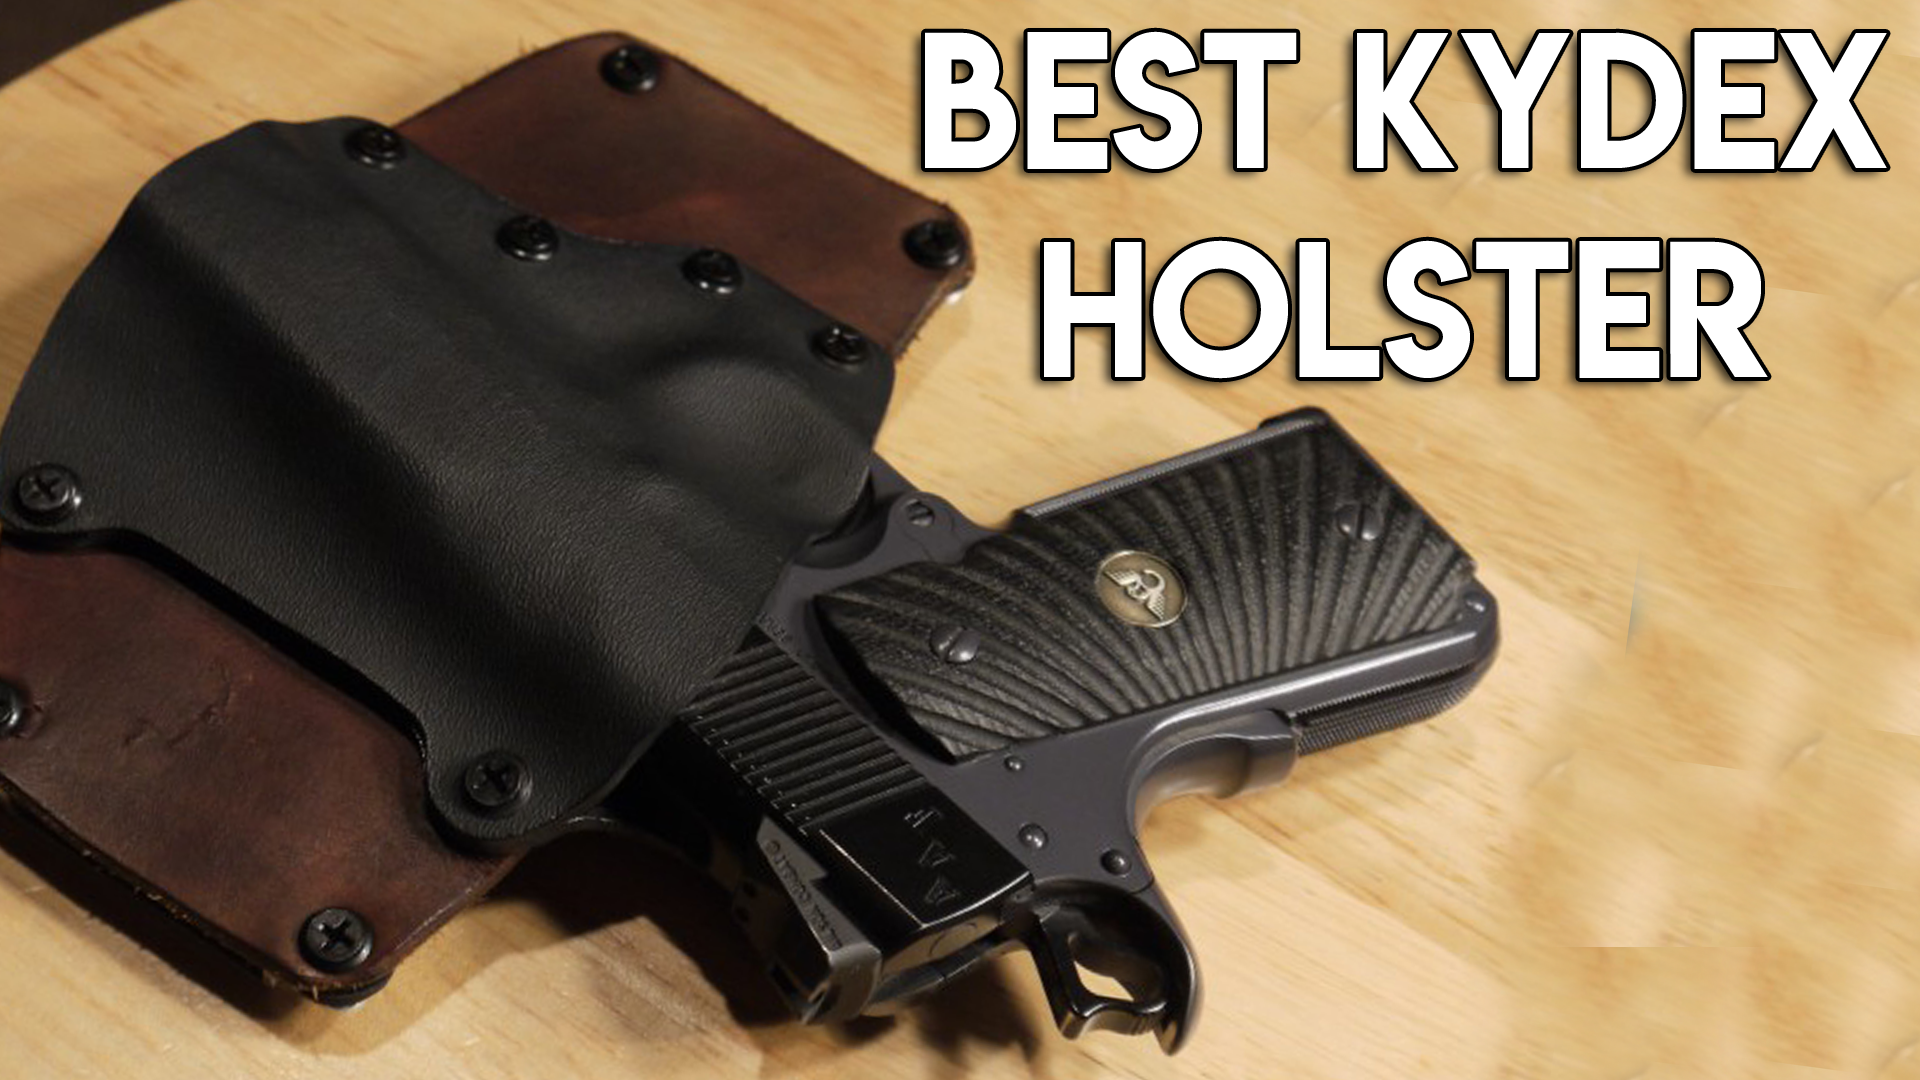 Things to be noted about the Holsters